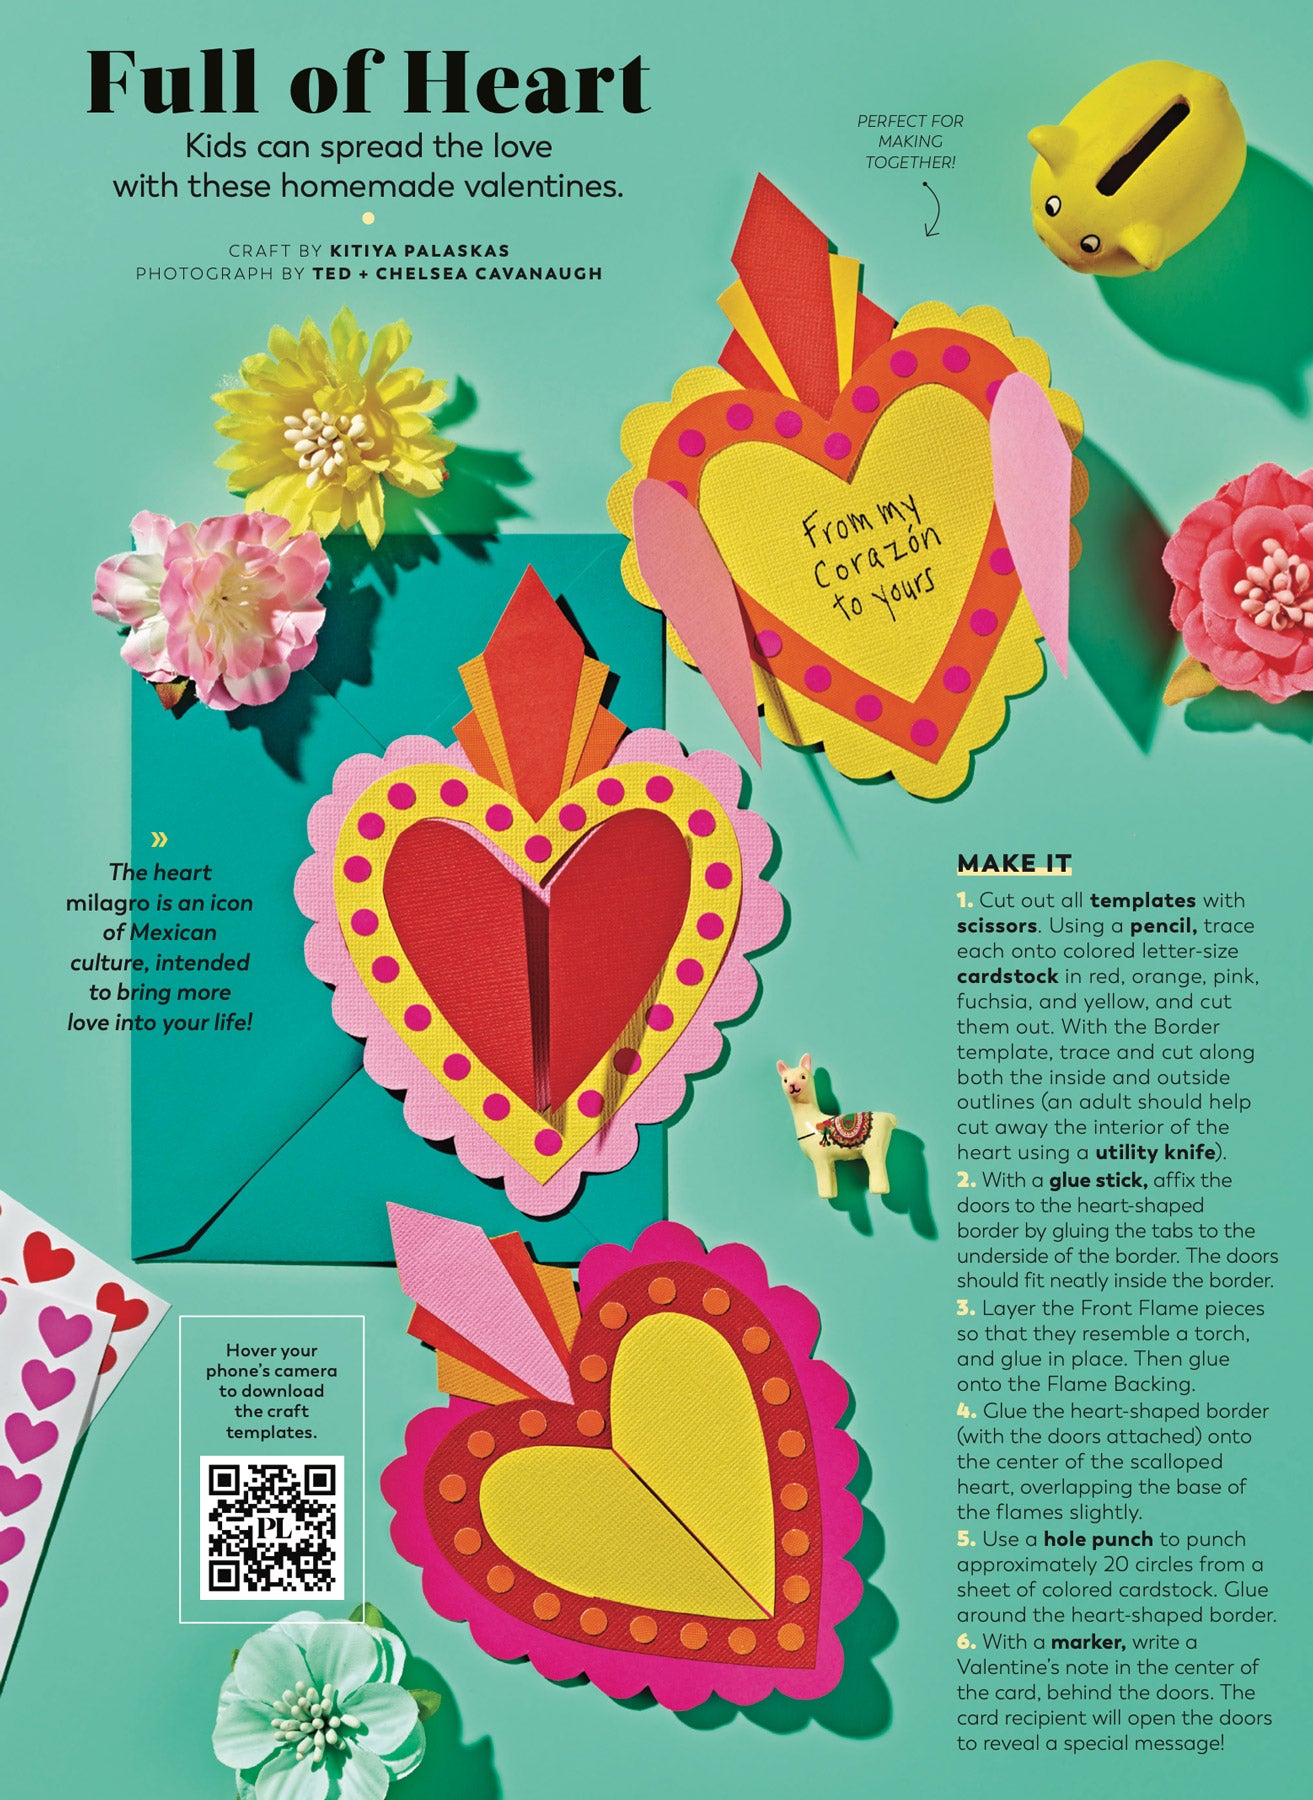 A collection of heart-shaped papercraft gift cards in bright, warm colours, sit against a teal background, surrounded by stationery and craft supplies. 